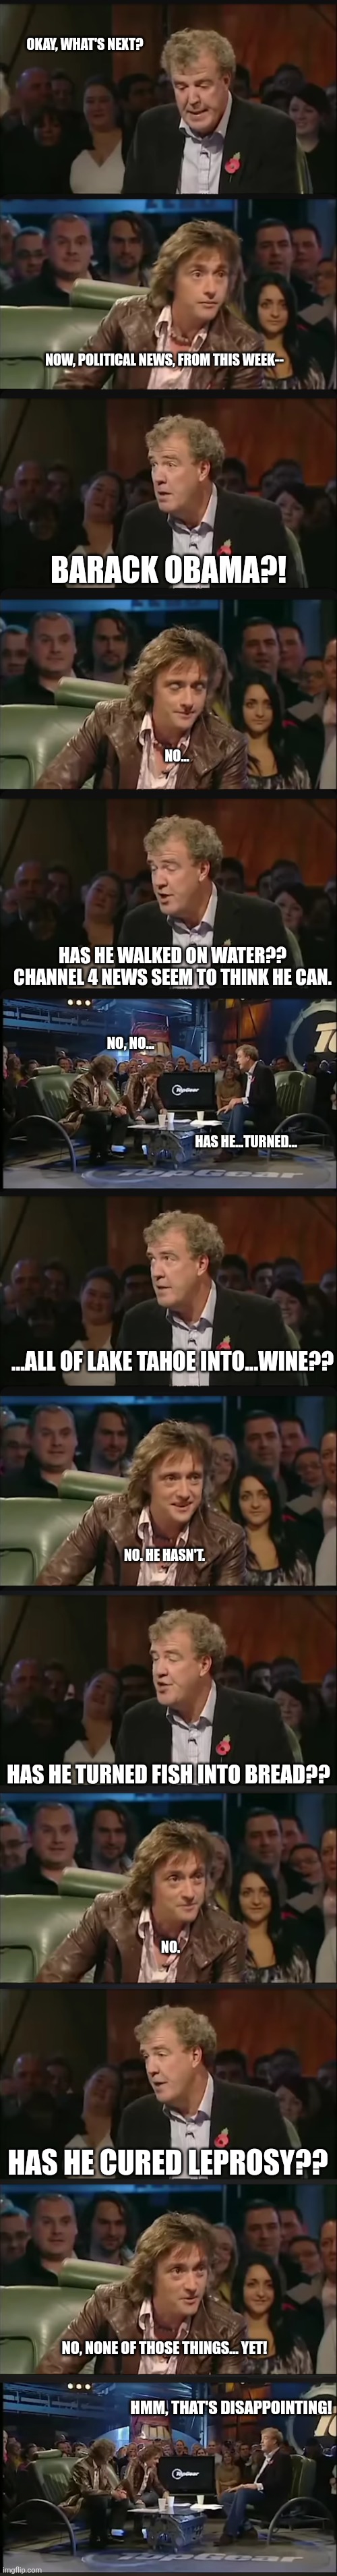 So he's not thebehbehJeezuz?? | OKAY, WHAT'S NEXT? NOW, POLITICAL NEWS, FROM THIS WEEK--; BARACK OBAMA?! NO... HAS HE WALKED ON WATER?? CHANNEL 4 NEWS SEEM TO THINK HE CAN. NO, NO... HAS HE...TURNED... ...ALL OF LAKE TAHOE INTO...WINE?? NO. HE HASN'T. HAS HE TURNED FISH INTO BREAD?? NO. HAS HE CURED LEPROSY?? NO, NONE OF THOSE THINGS... YET! HMM, THAT'S DISAPPOINTING! | image tagged in top gear,barack obama,jeremy clarkson | made w/ Imgflip meme maker